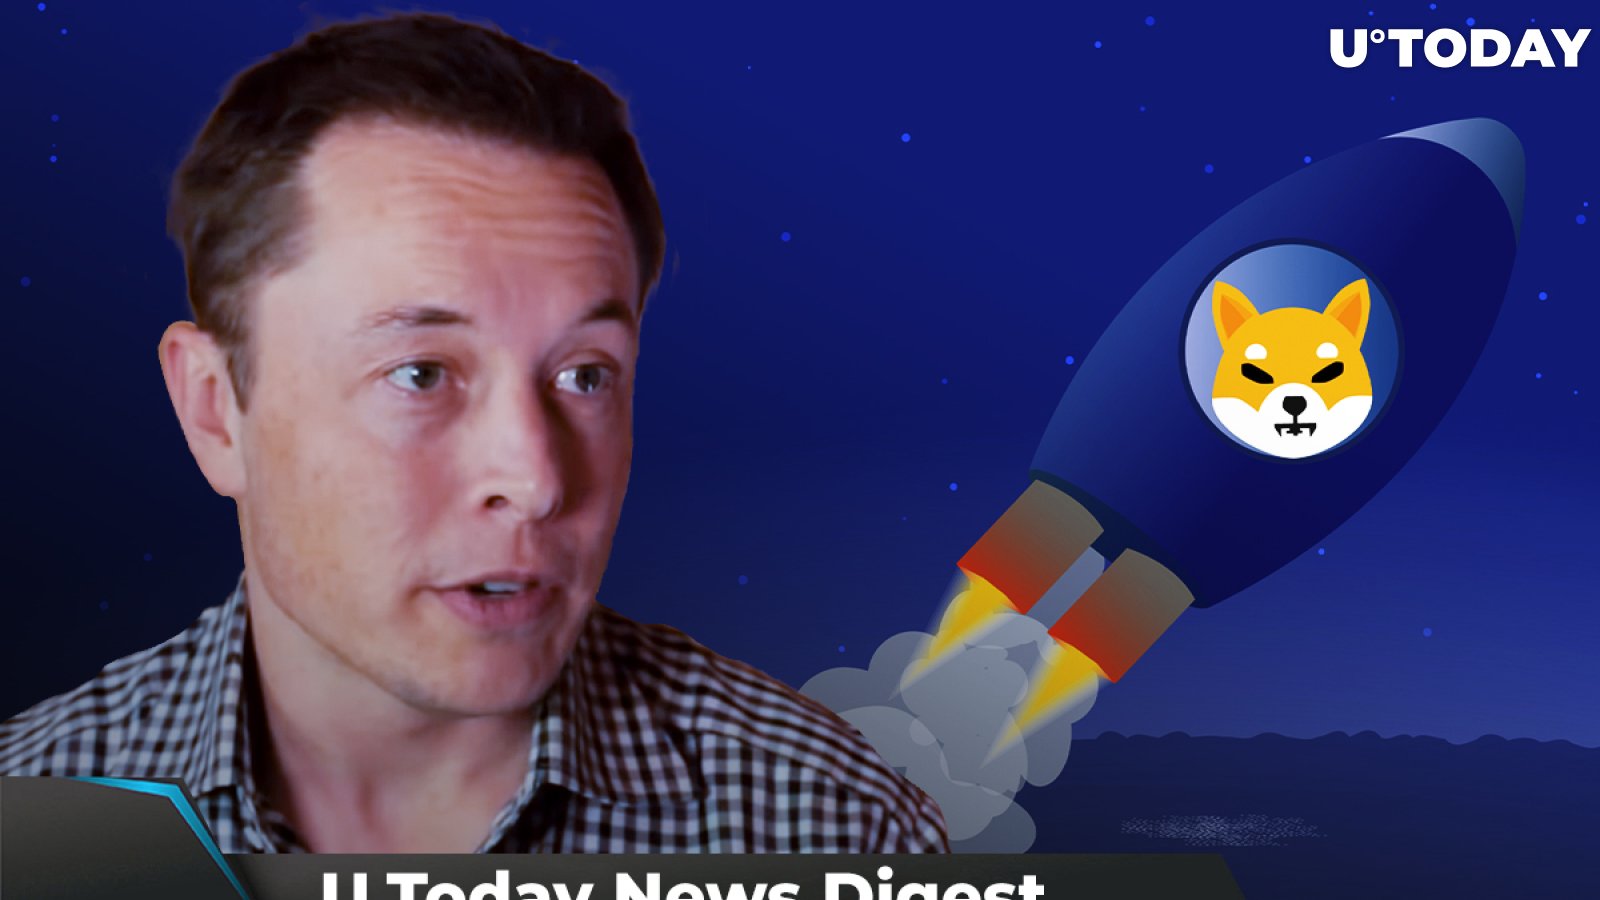 Elon Musk Pushes SHIB Up 15%, Binance Burns $639 Million Worth of BNB, ProShares Launches Bitcoin ETF: Crypto News Digest by U.Today